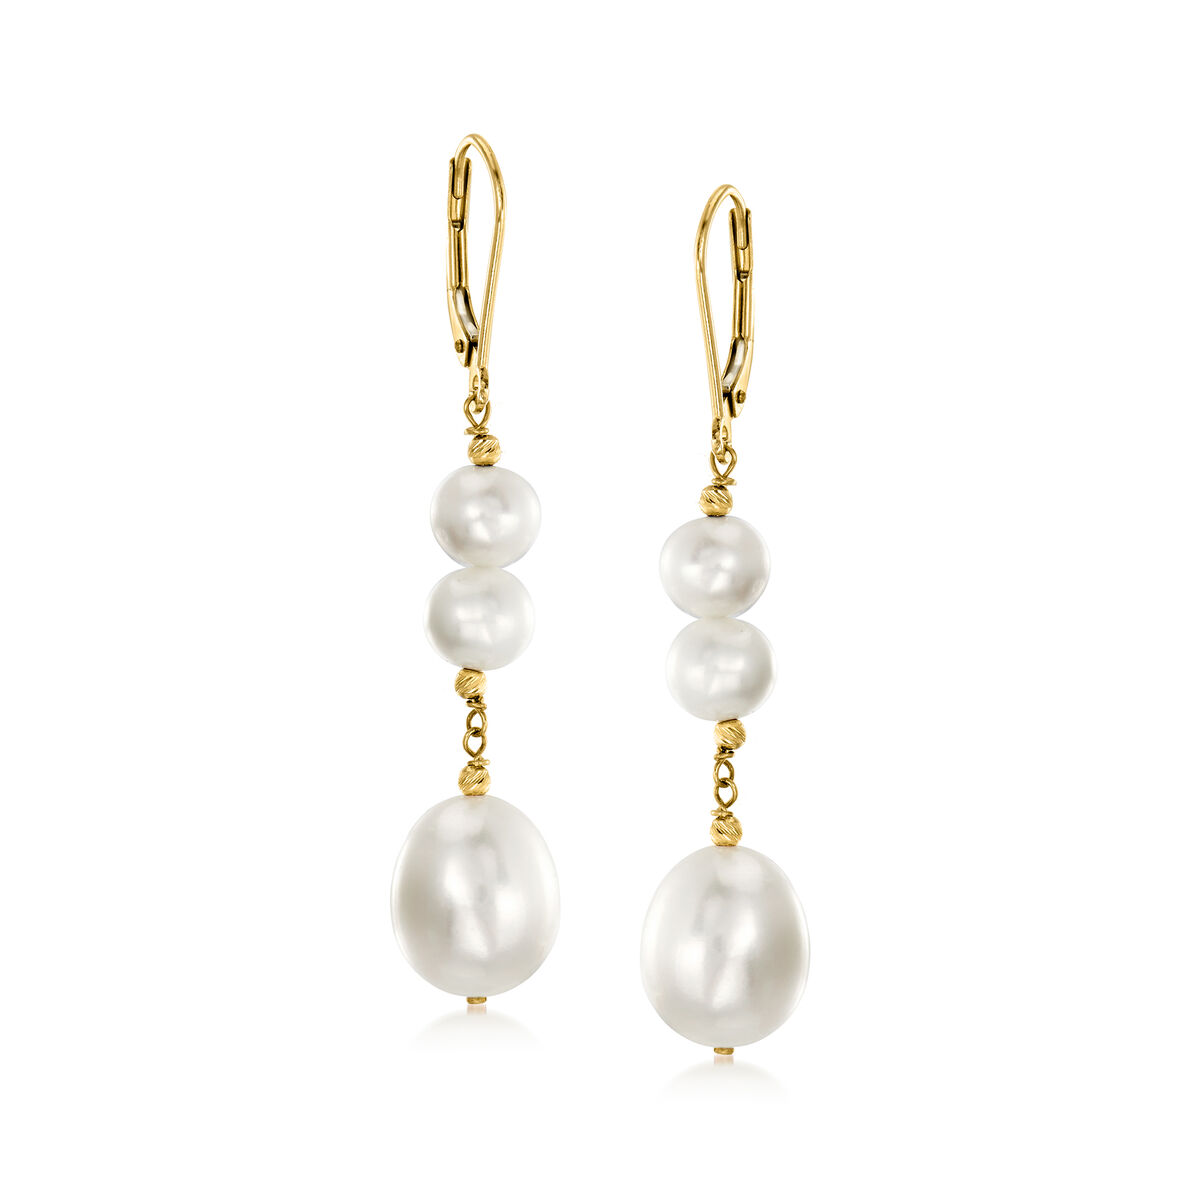 6.5-11mm Cultured Pearl Drop Earrings in 14kt Yellow Gold | Ross-Simons